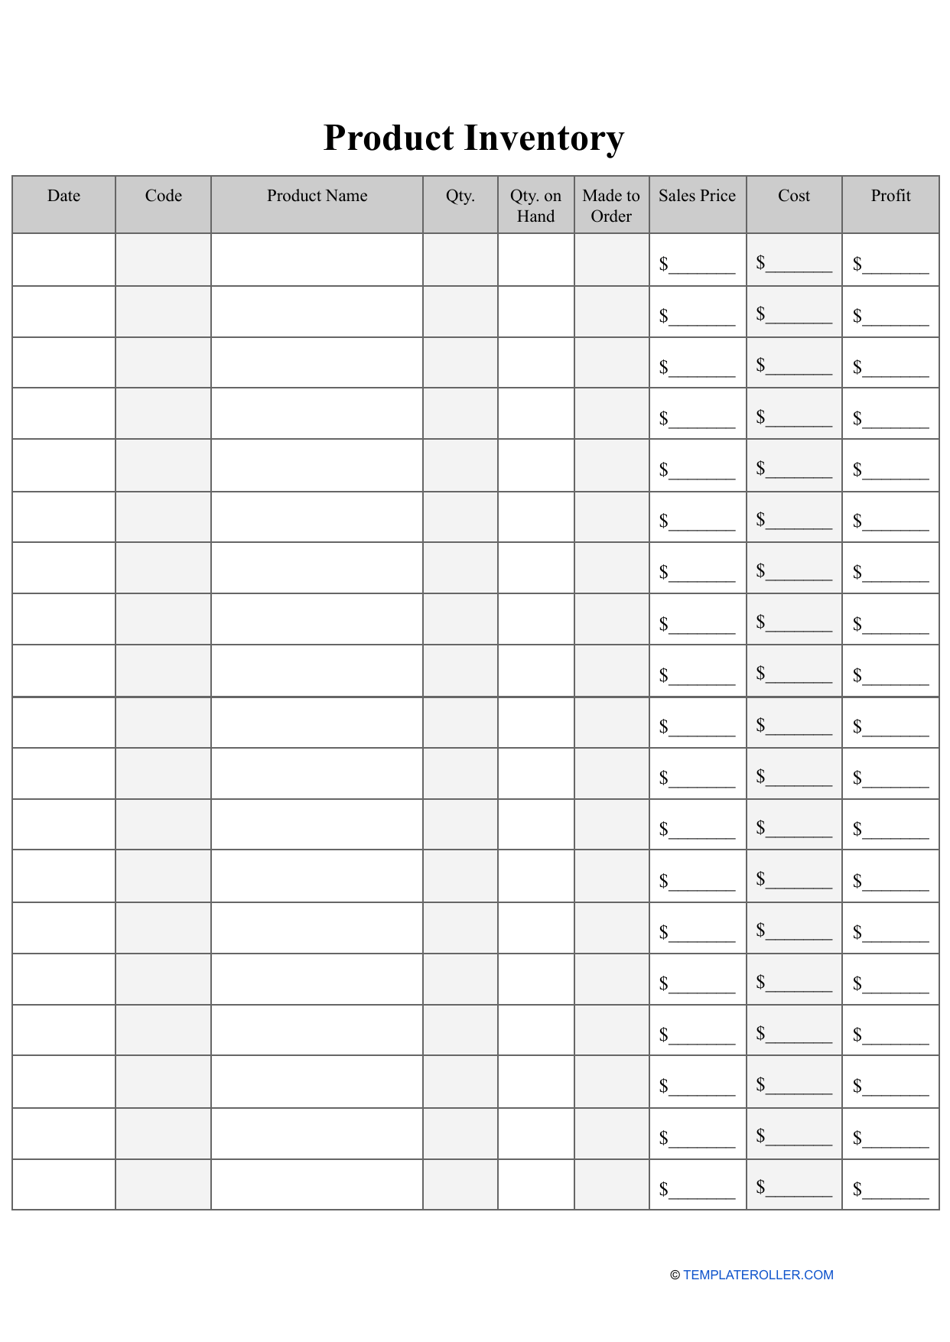 Product Inventory Template, Page 1